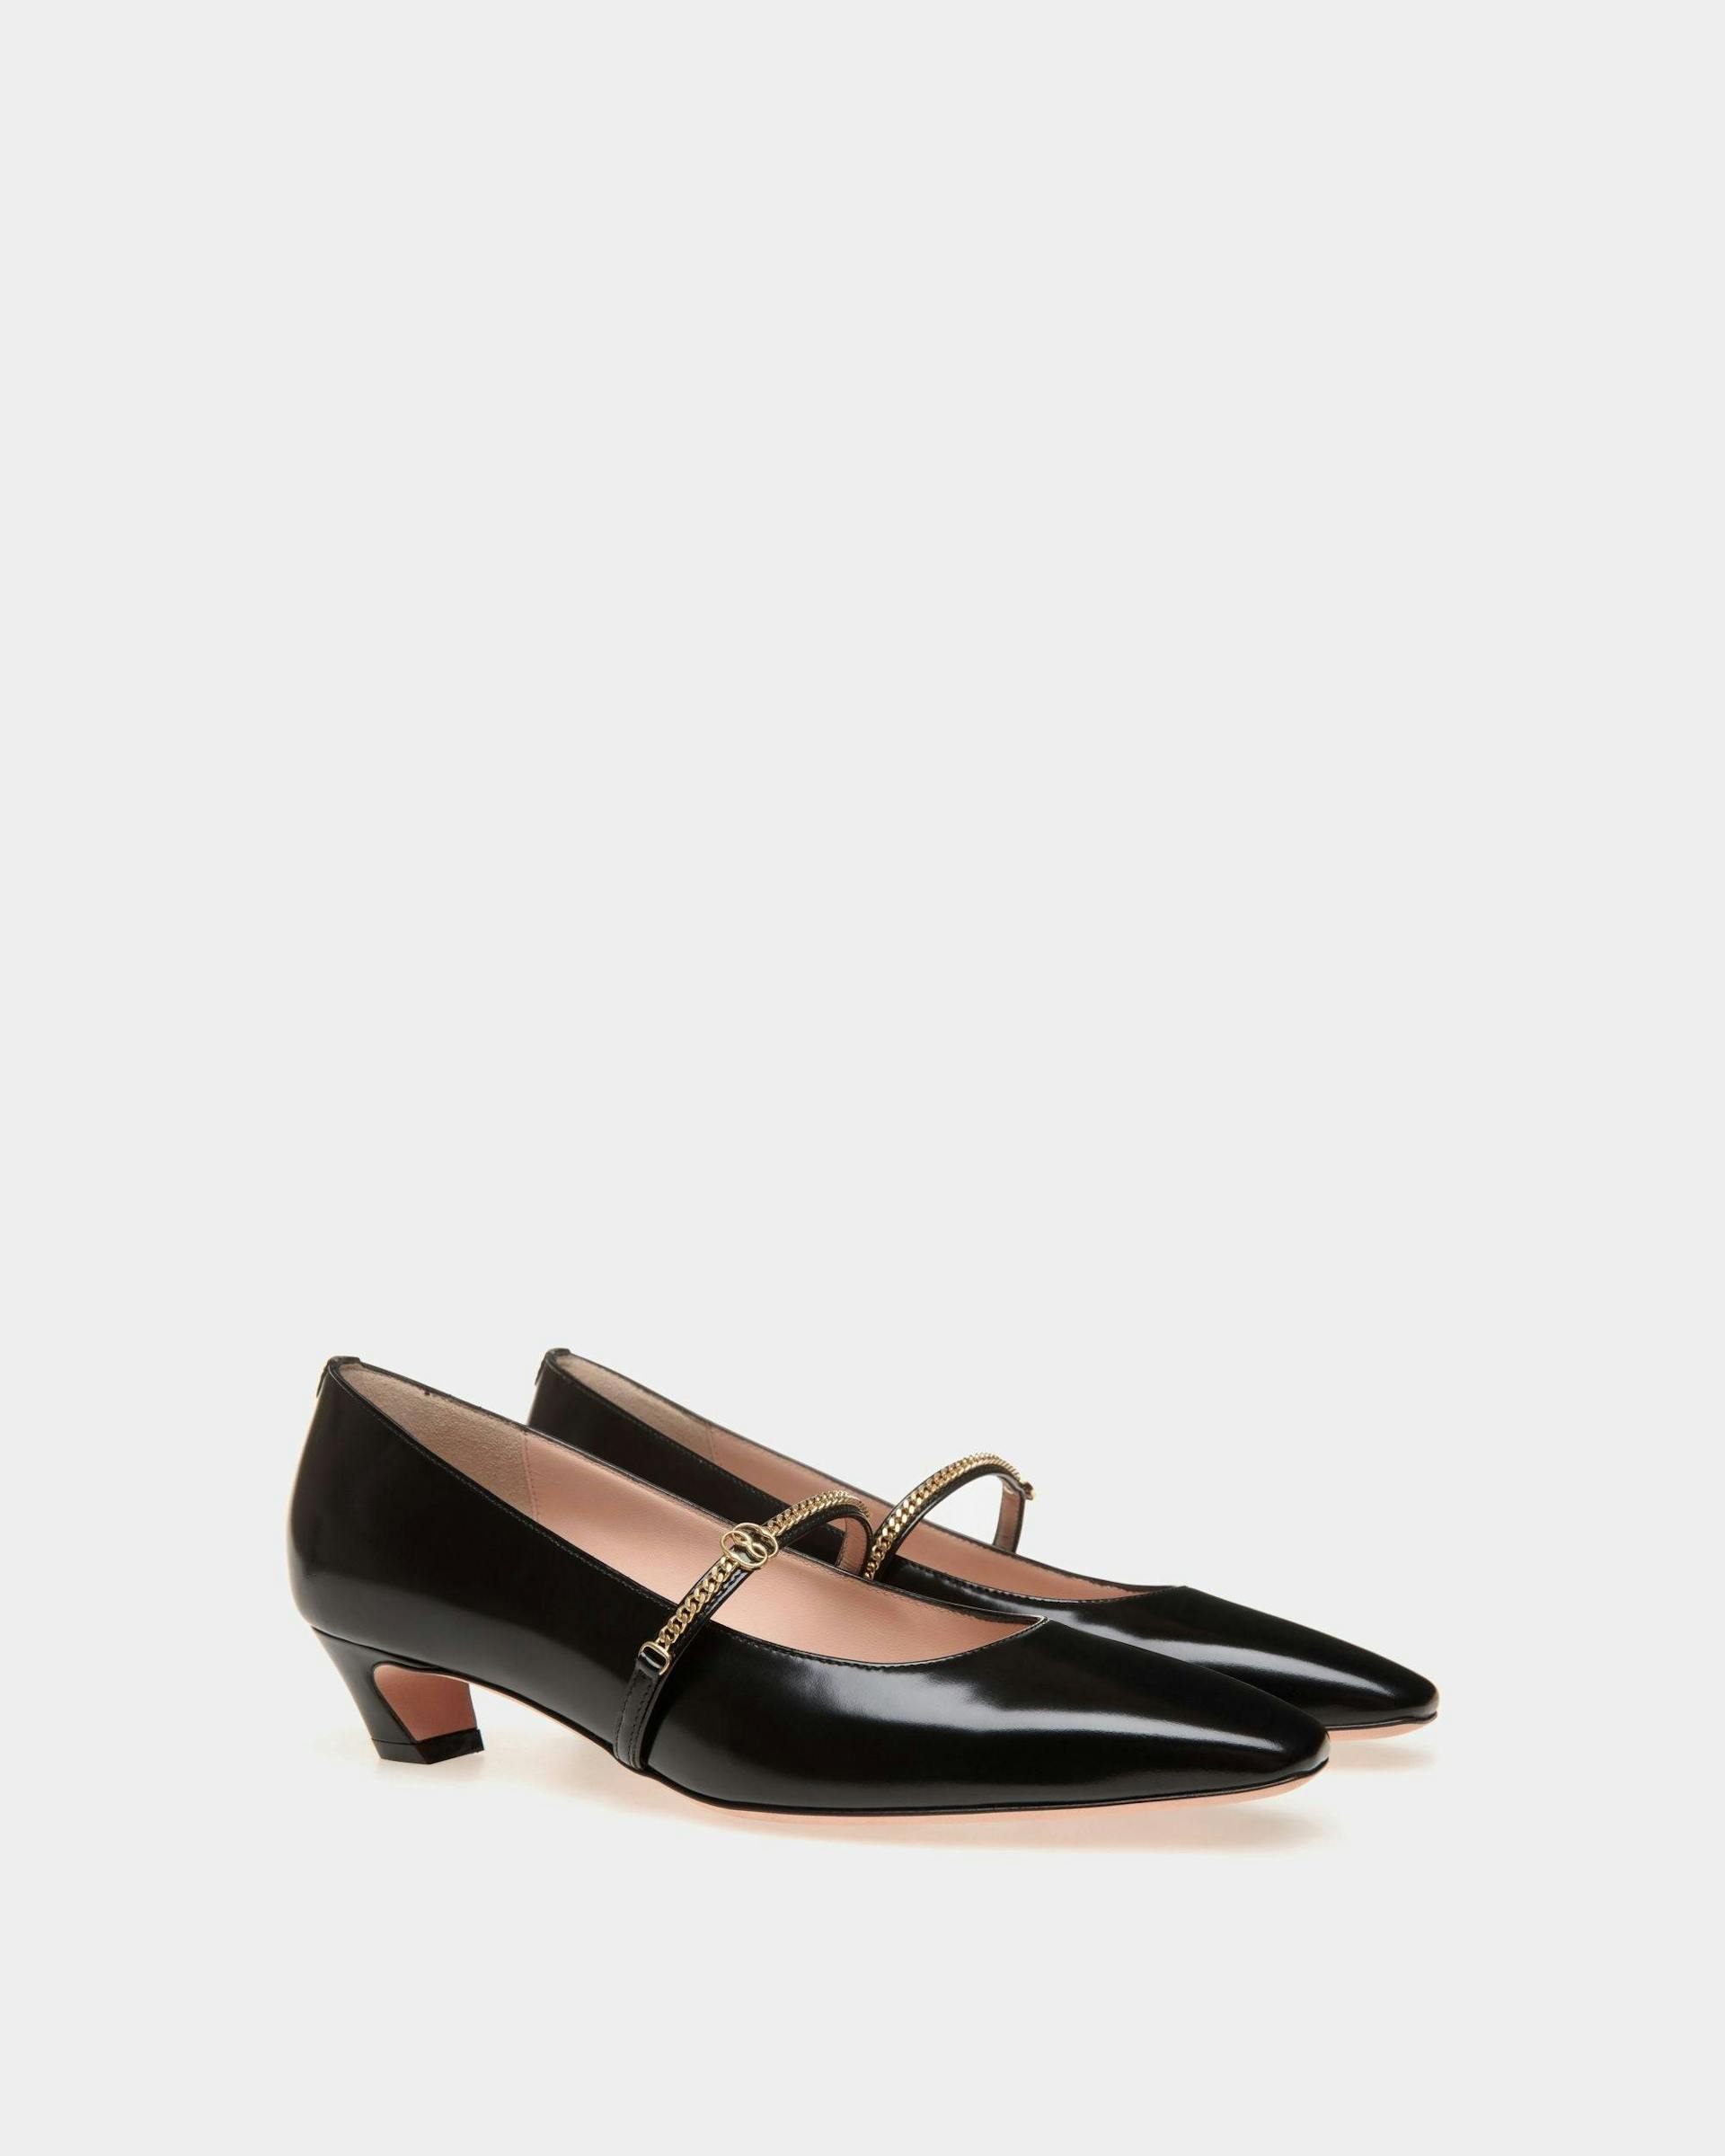 Women's Sylt Mary-Jane Pump In Black Leather | Bally | Still Life 3/4 Front